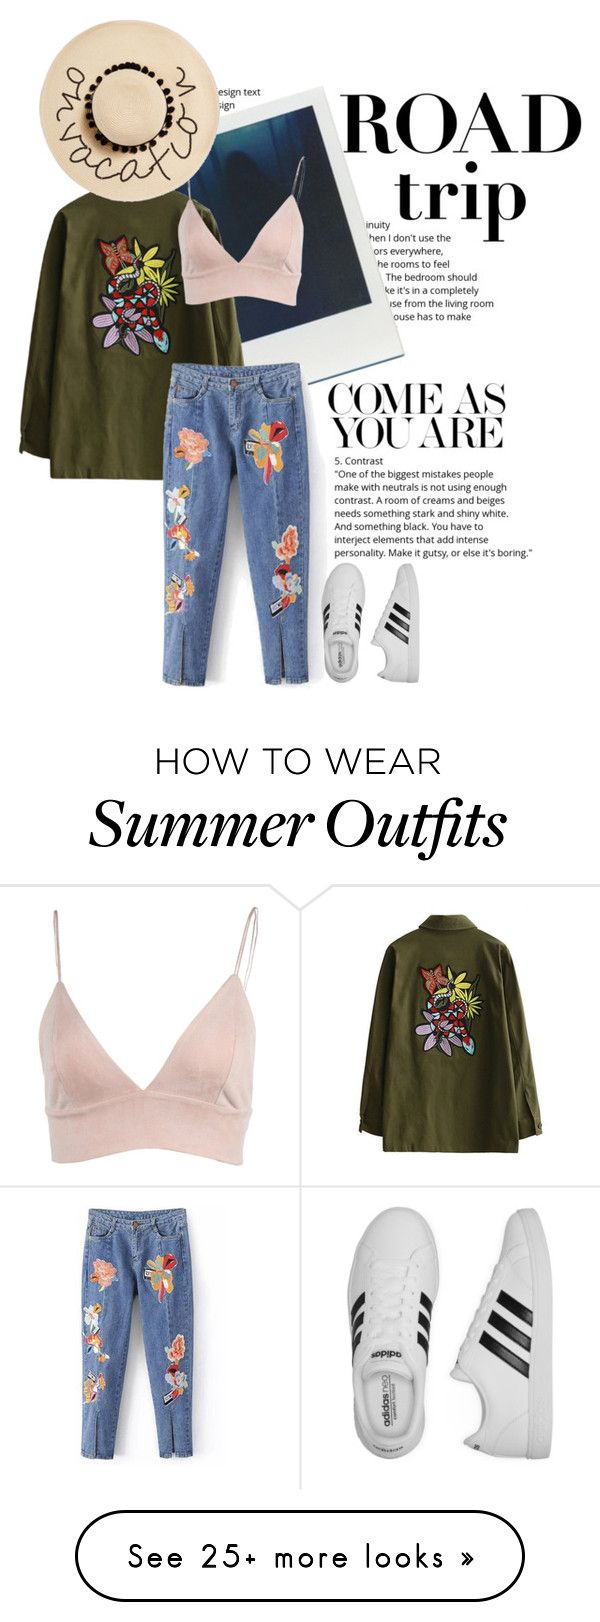 "road trip outfit//contest" by meowausten on Polyvore featuring Polaro...